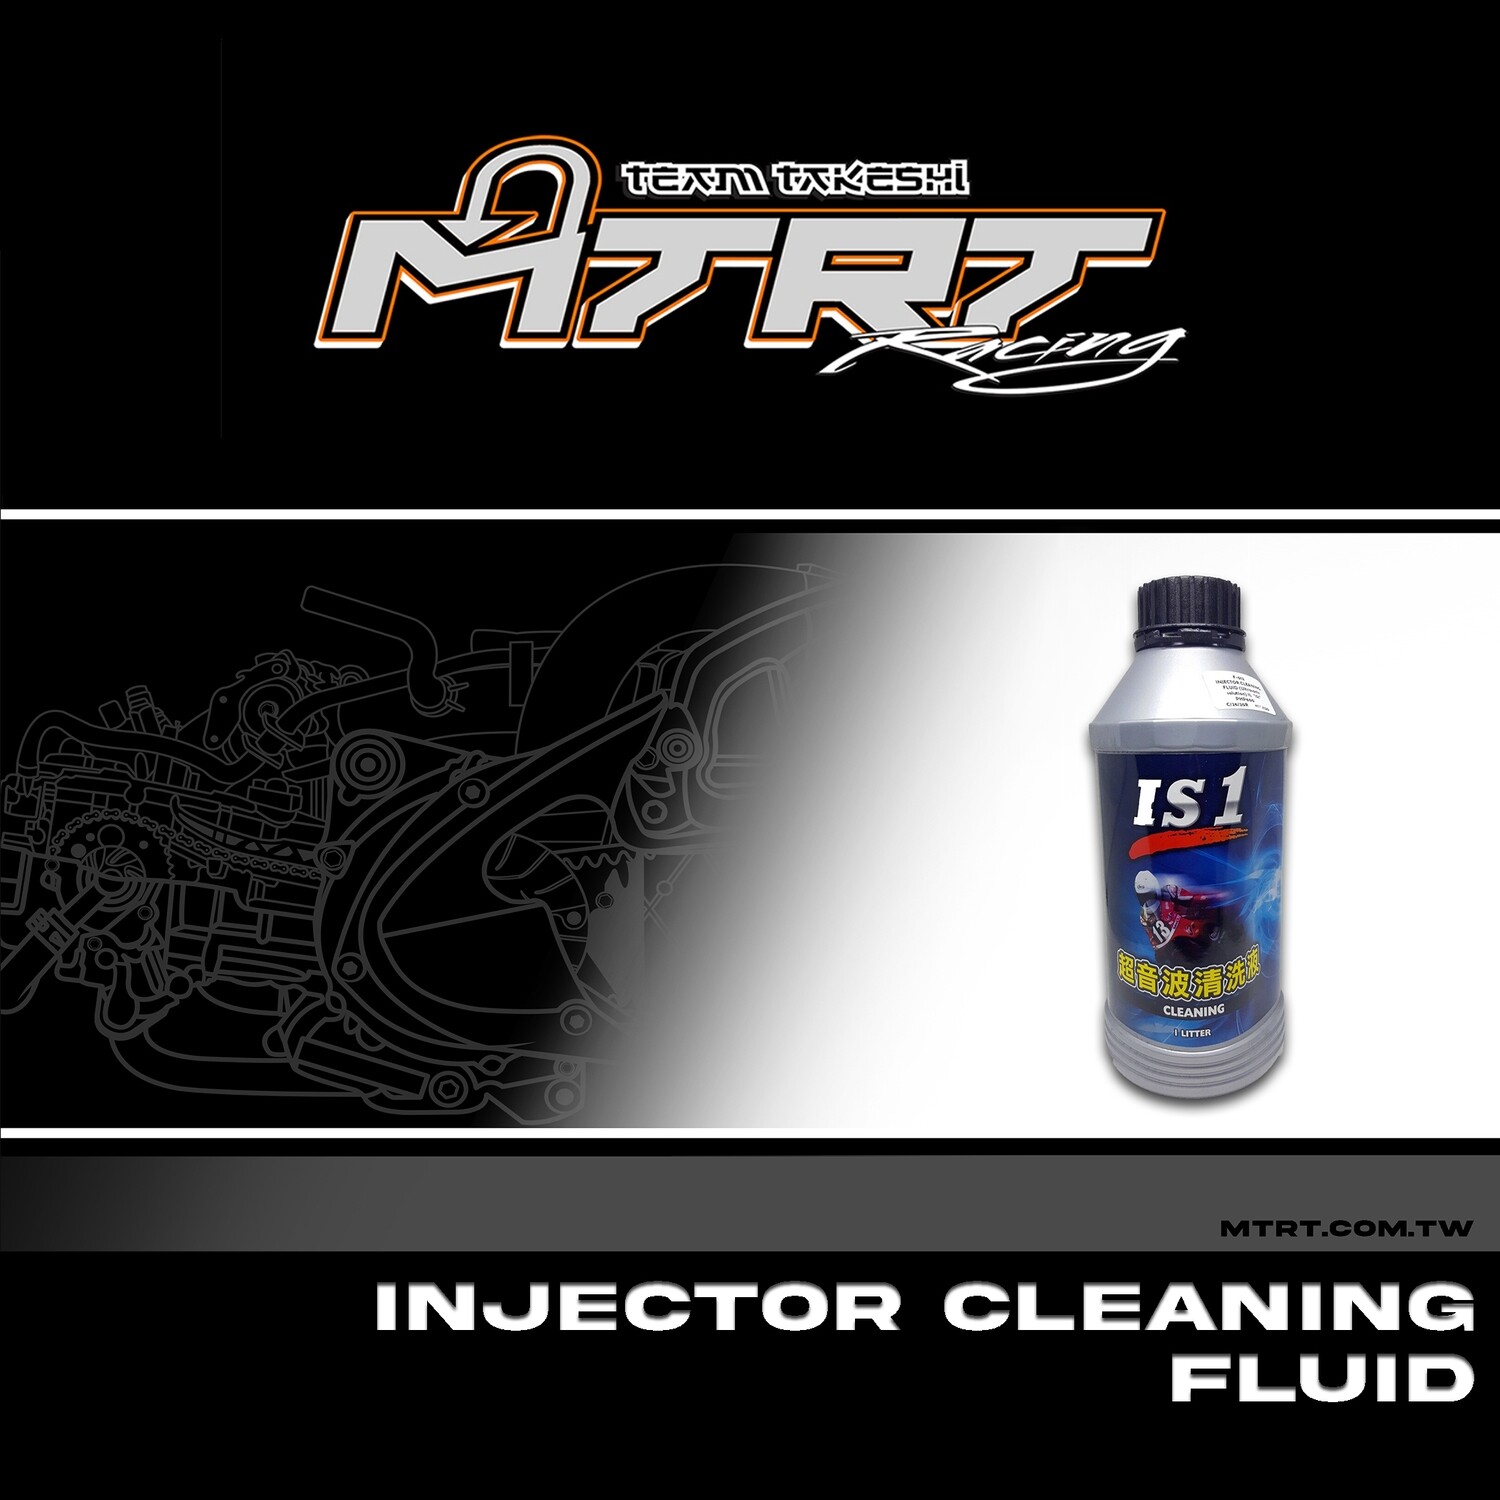 INJECTOR CLEANING FLUID ULTRA SONIC SOLUTION 1L